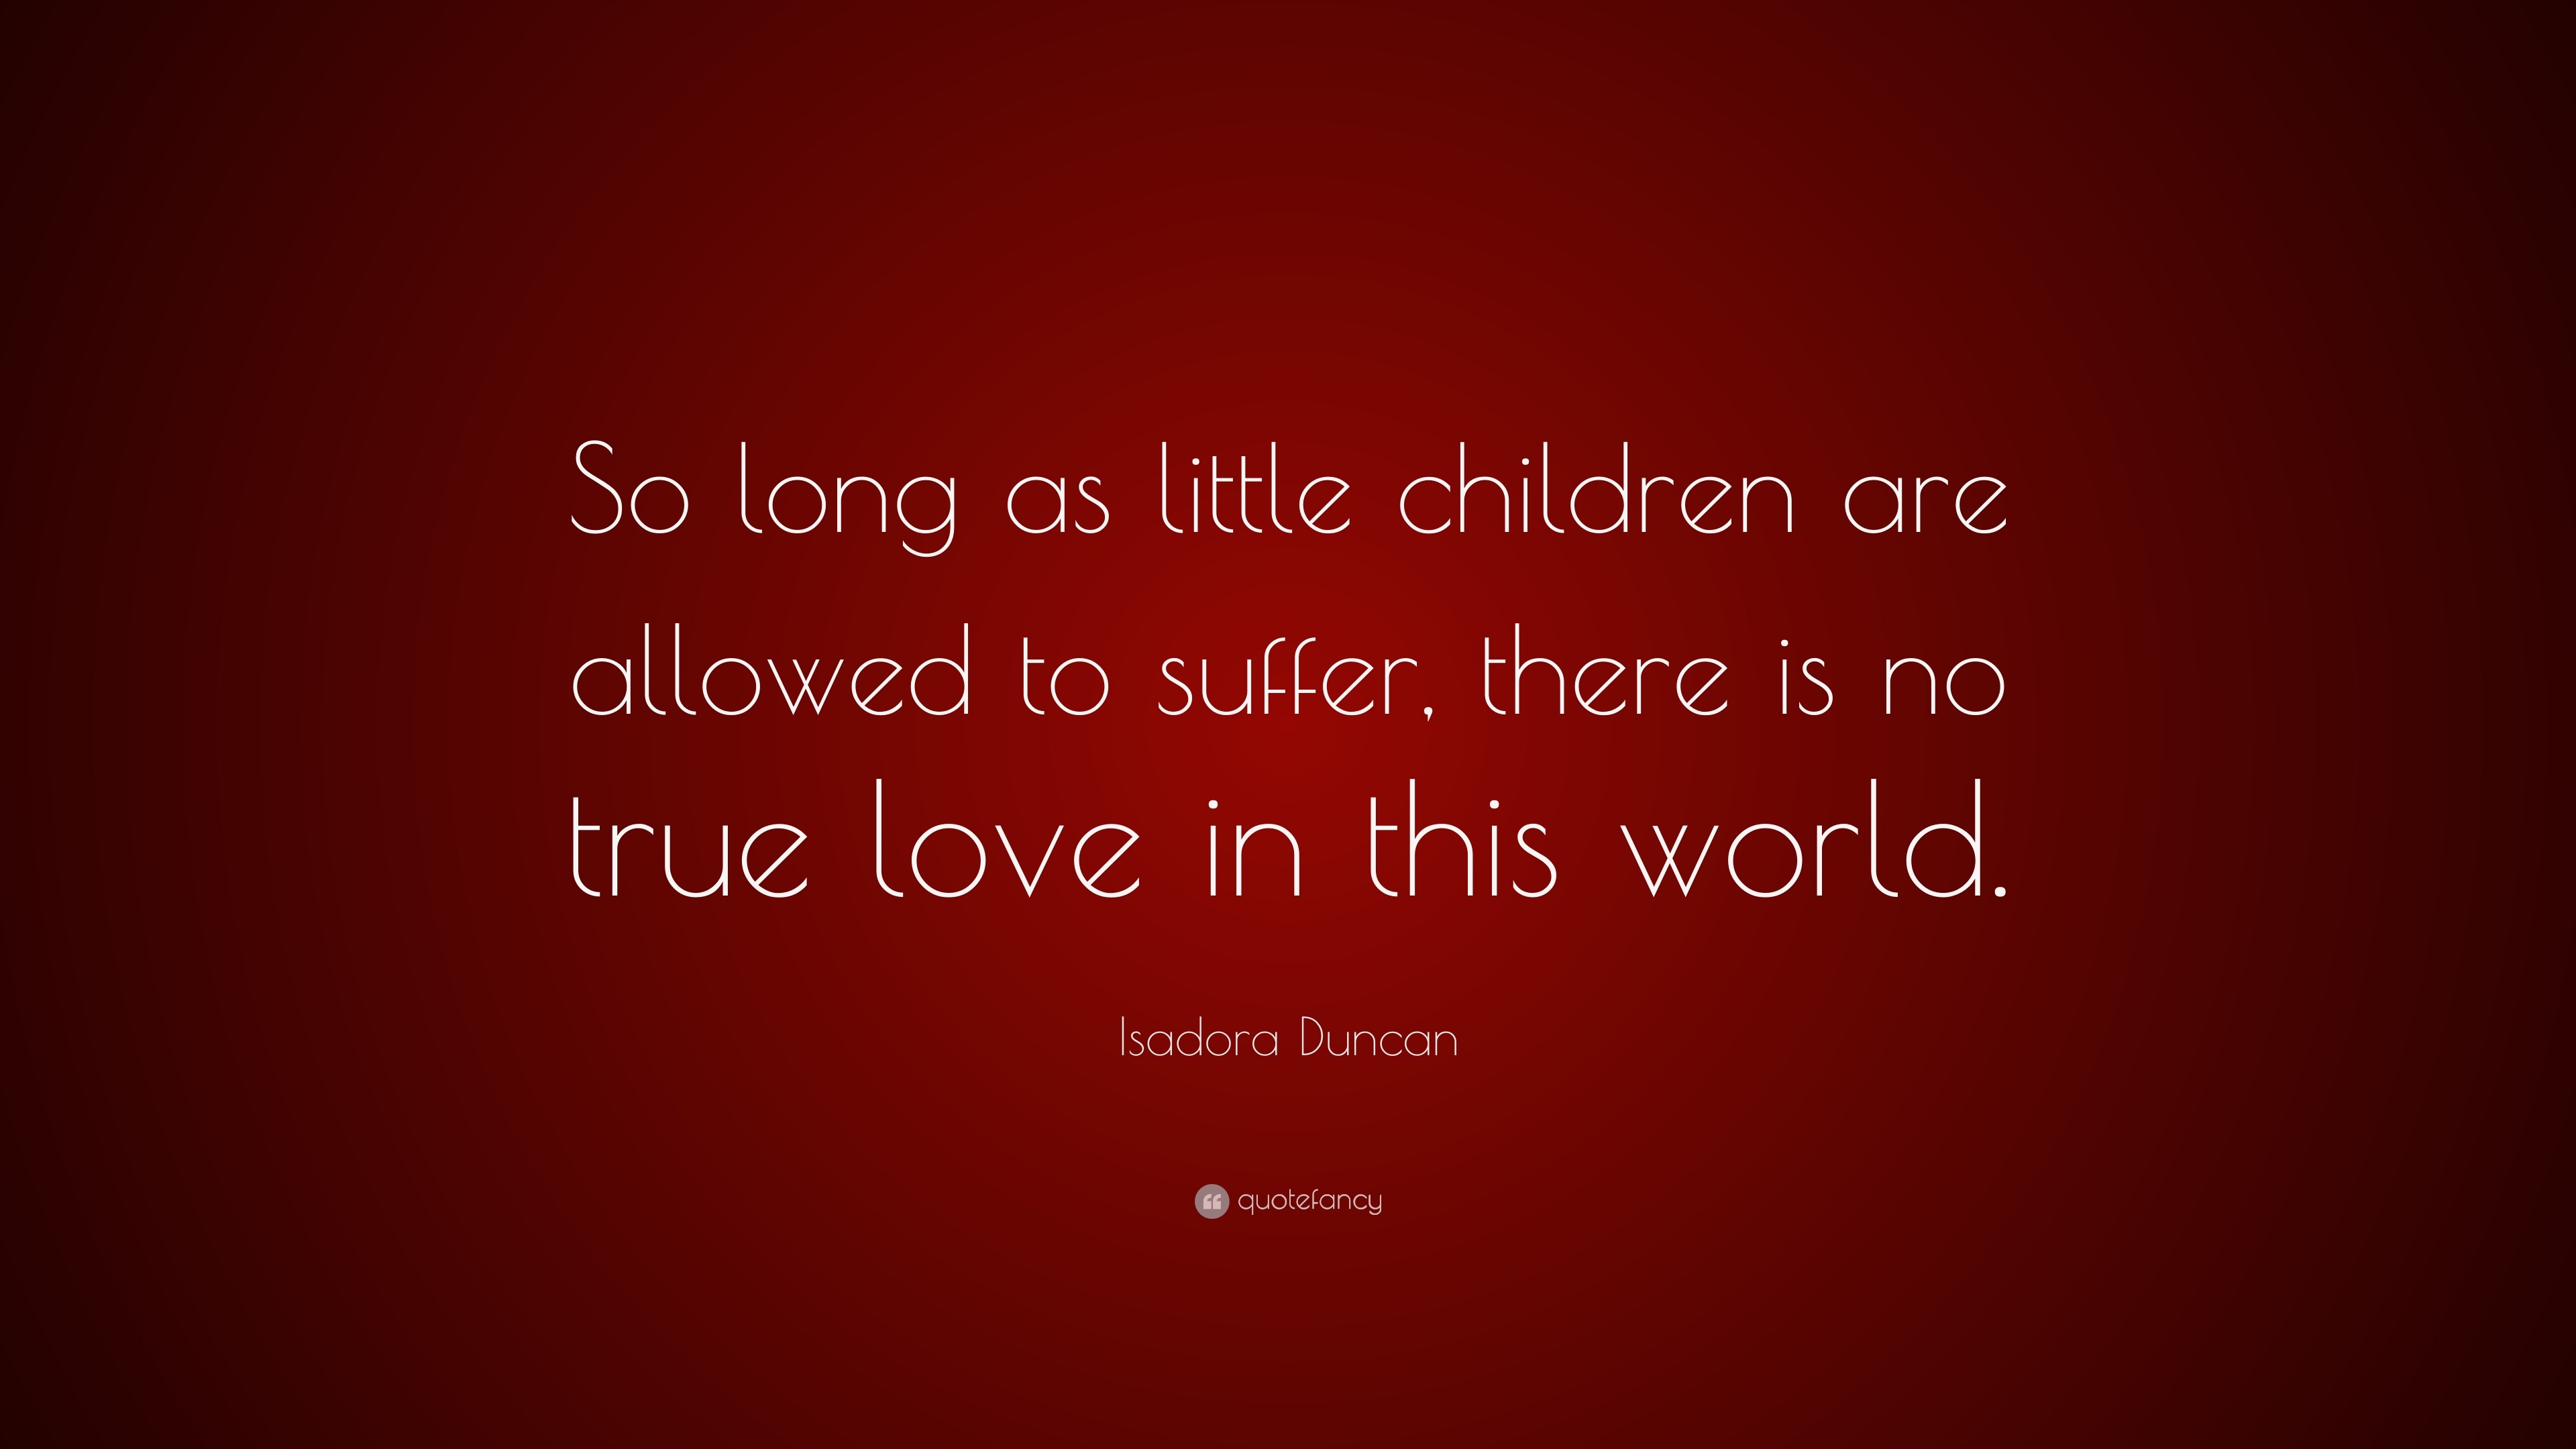 Isadora Duncan Quote “So long as little children are allowed to suffer there